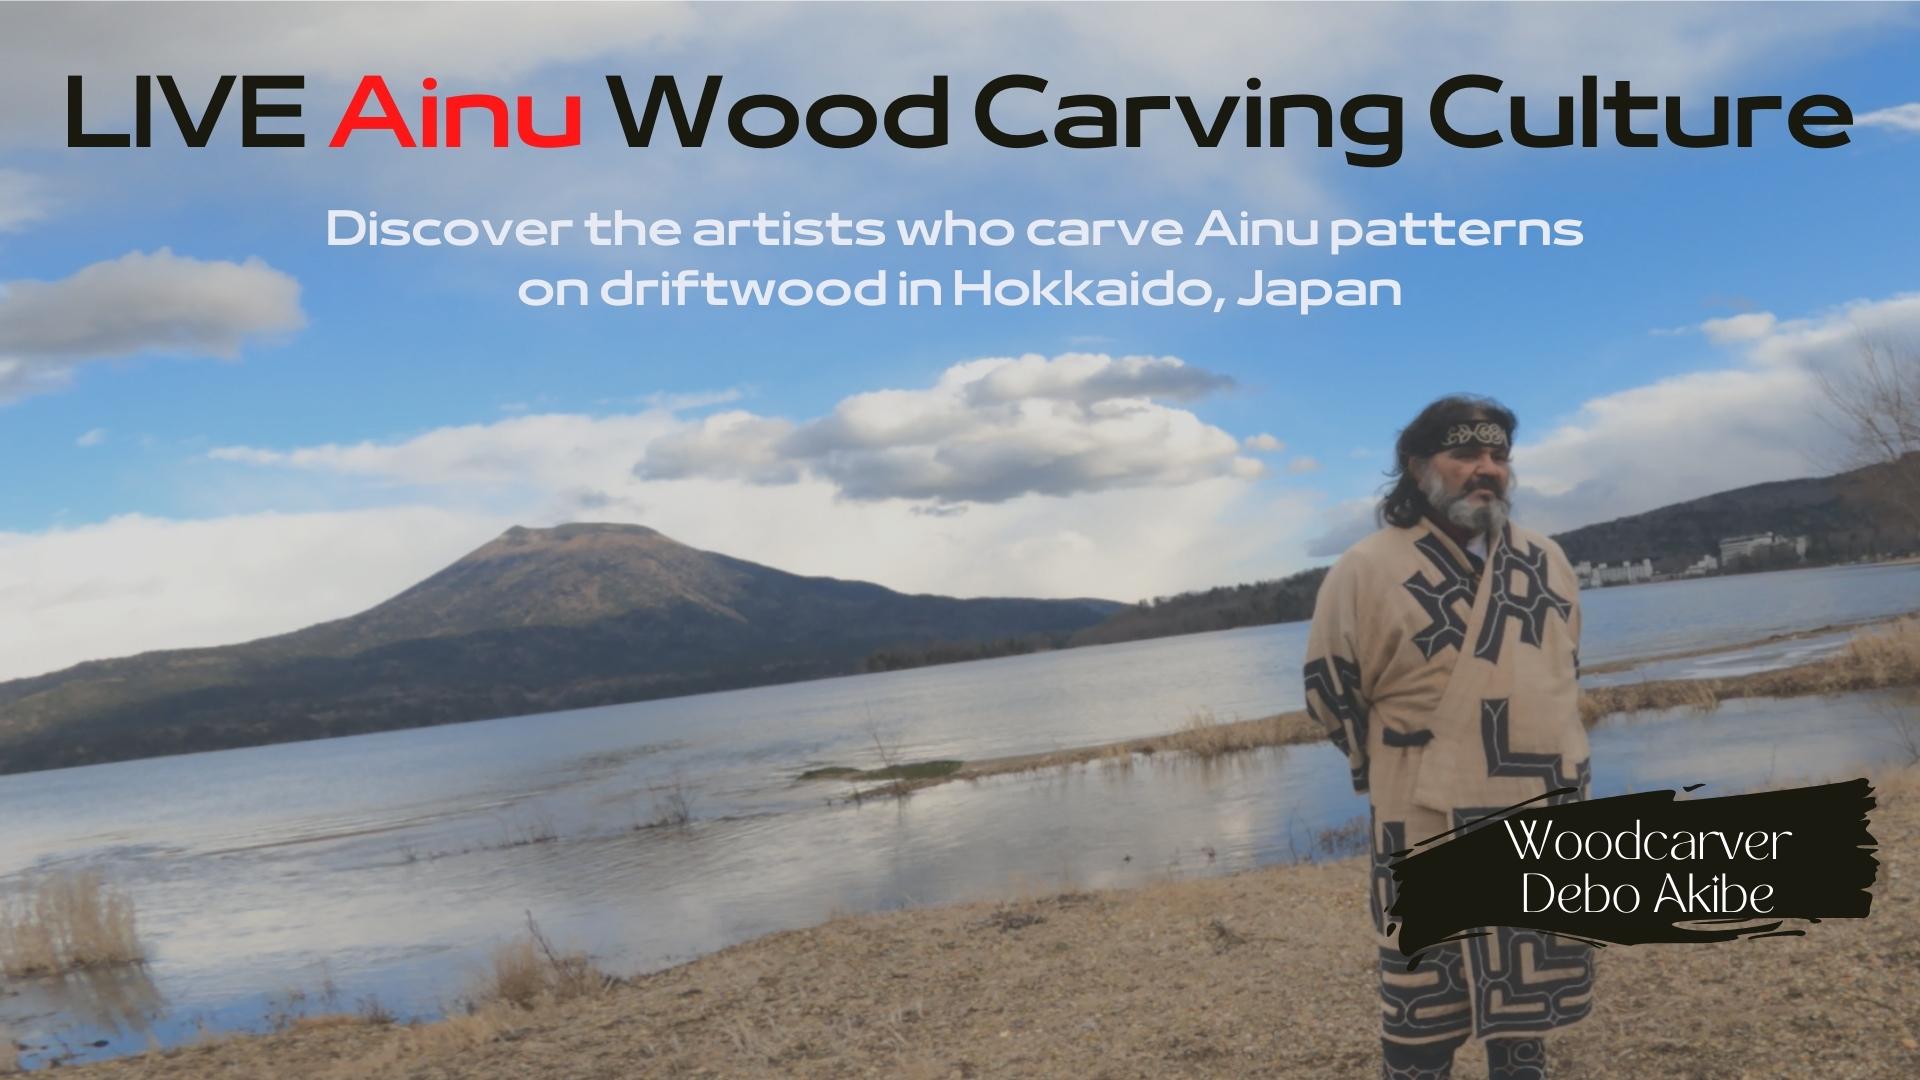 LIVE Ainu Wood Carving Culture - Discover the artists who carve Ainu patterns on driftwood in Hokkaido, Japan